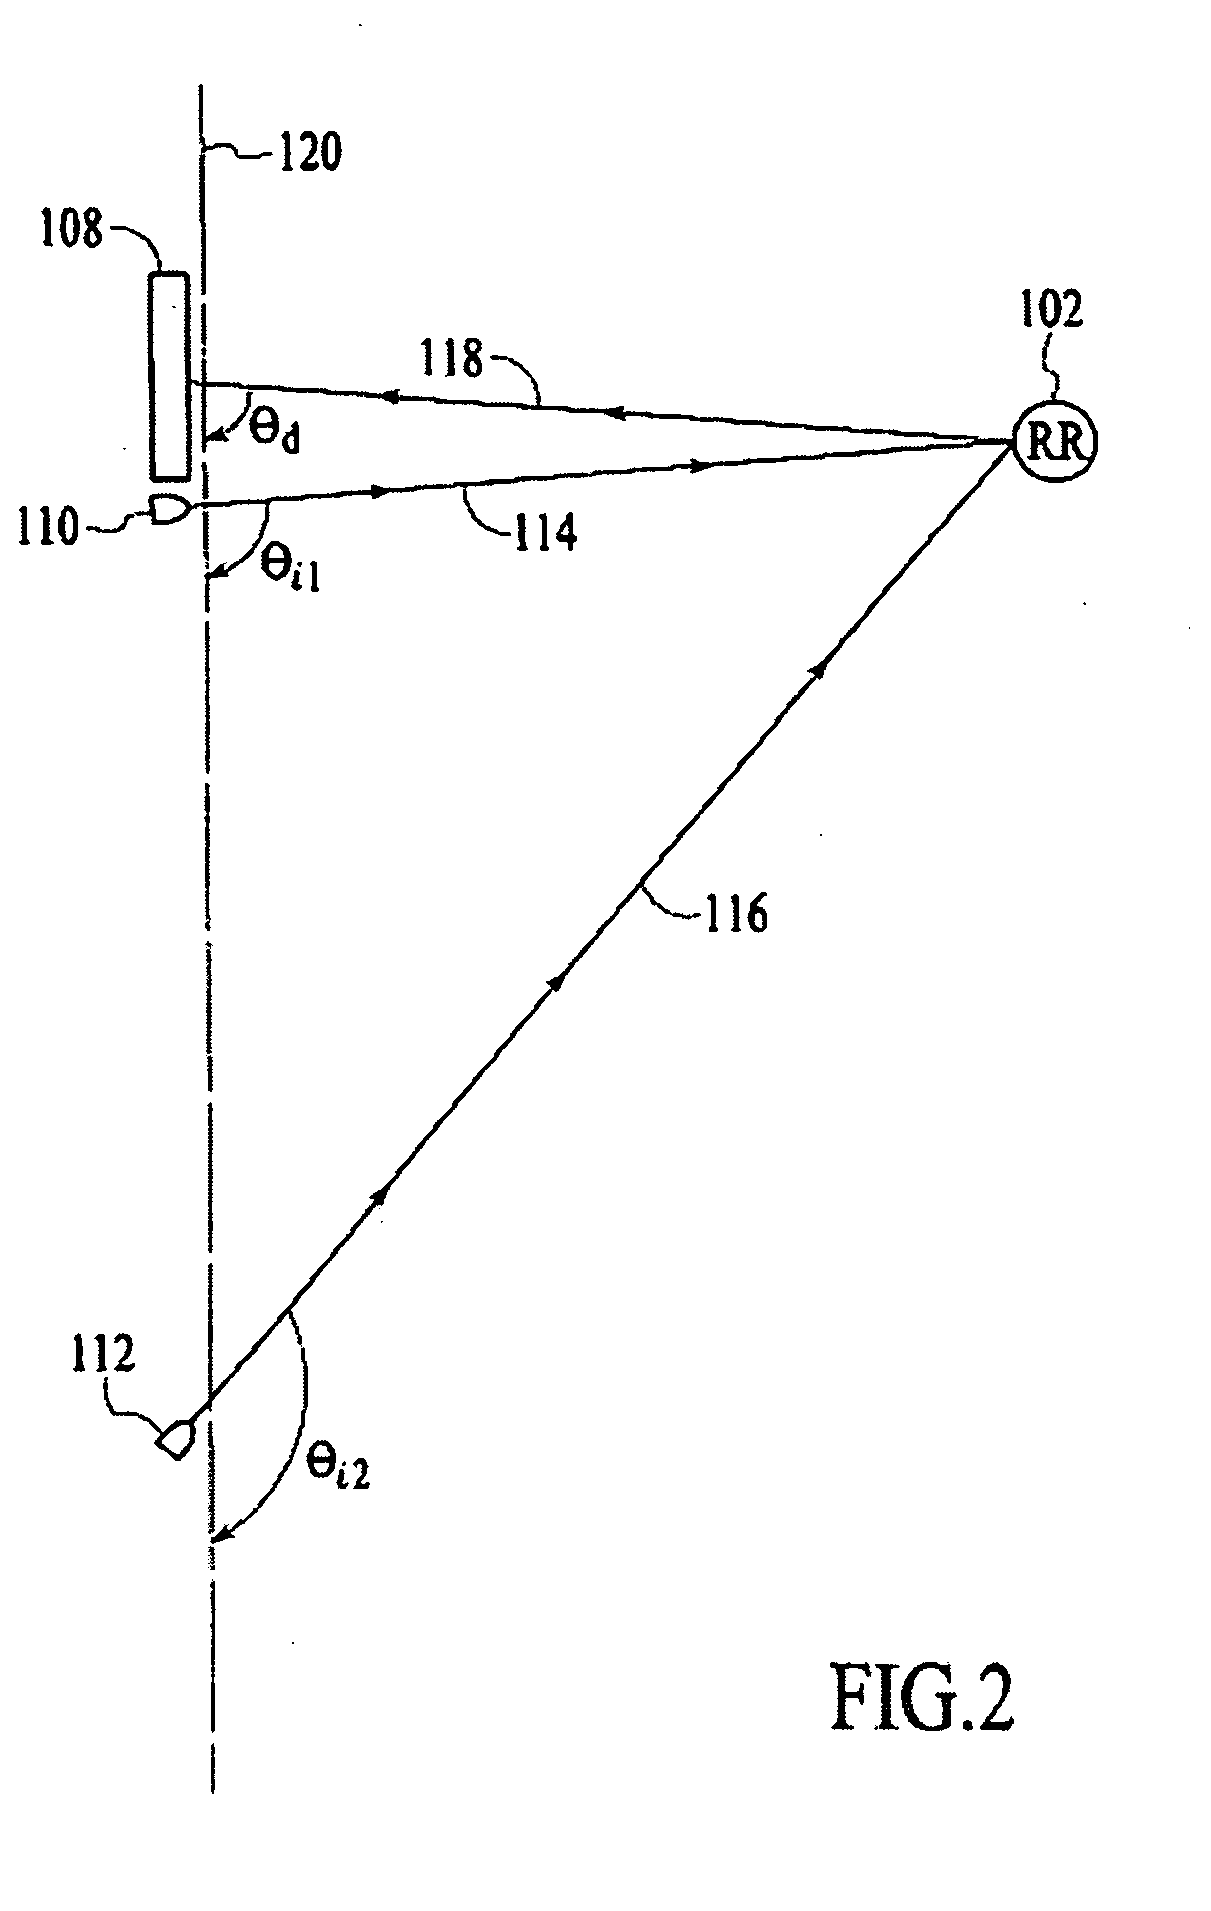 Method and apparatus for determining surface displacement based on an image of a retroreflector attached to the surface